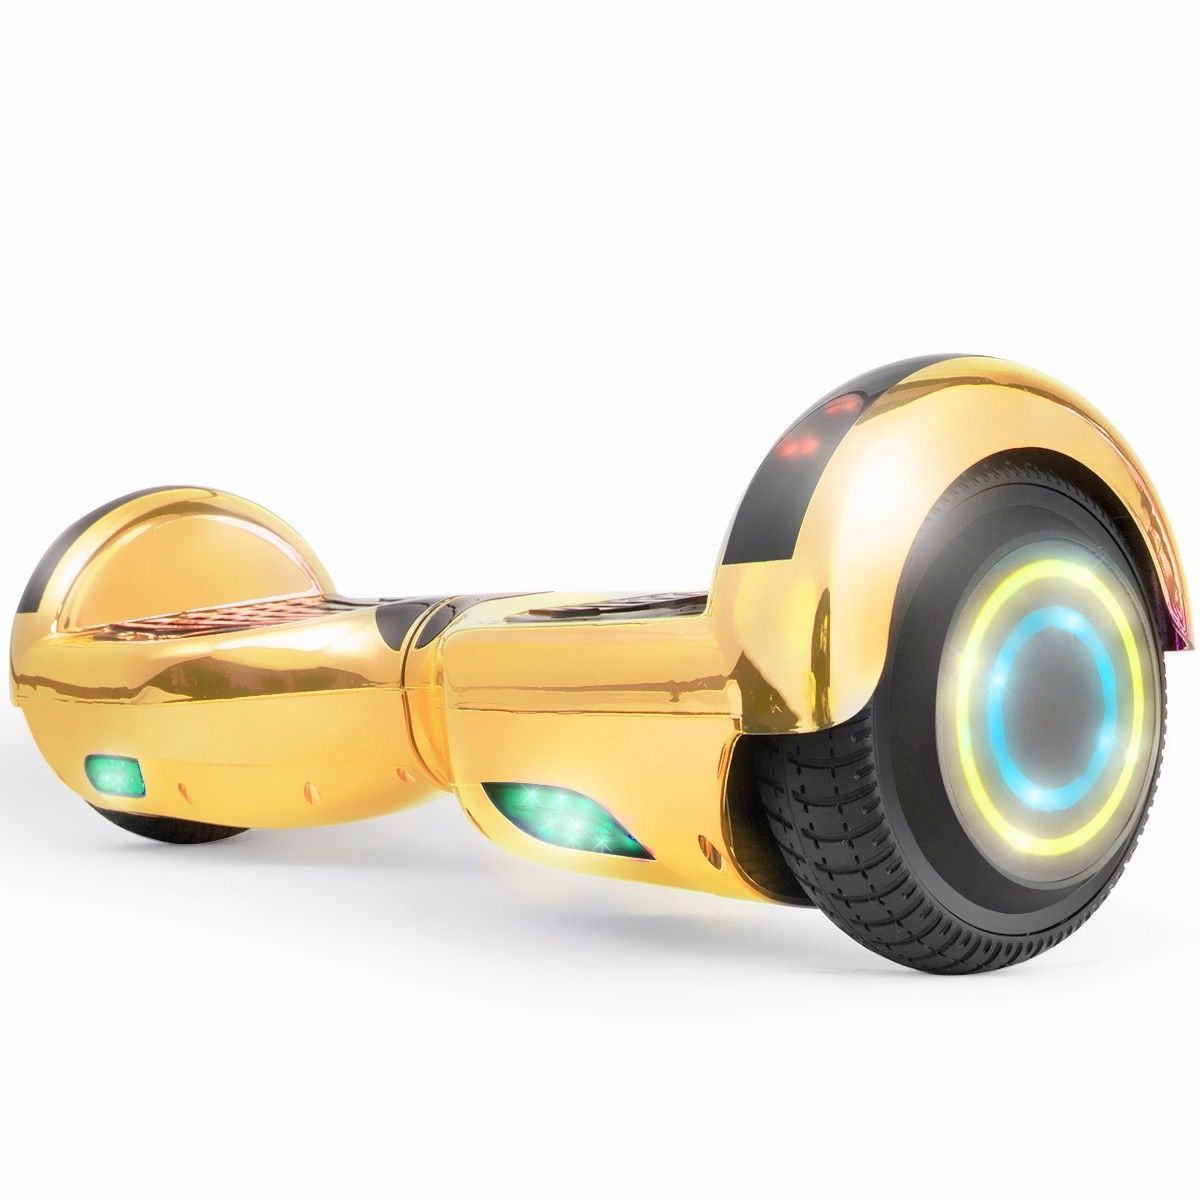 Flash Chrome Gold Bluetooth Hoverboard Two Wheel Balance Scooter UL2272 - $249.00